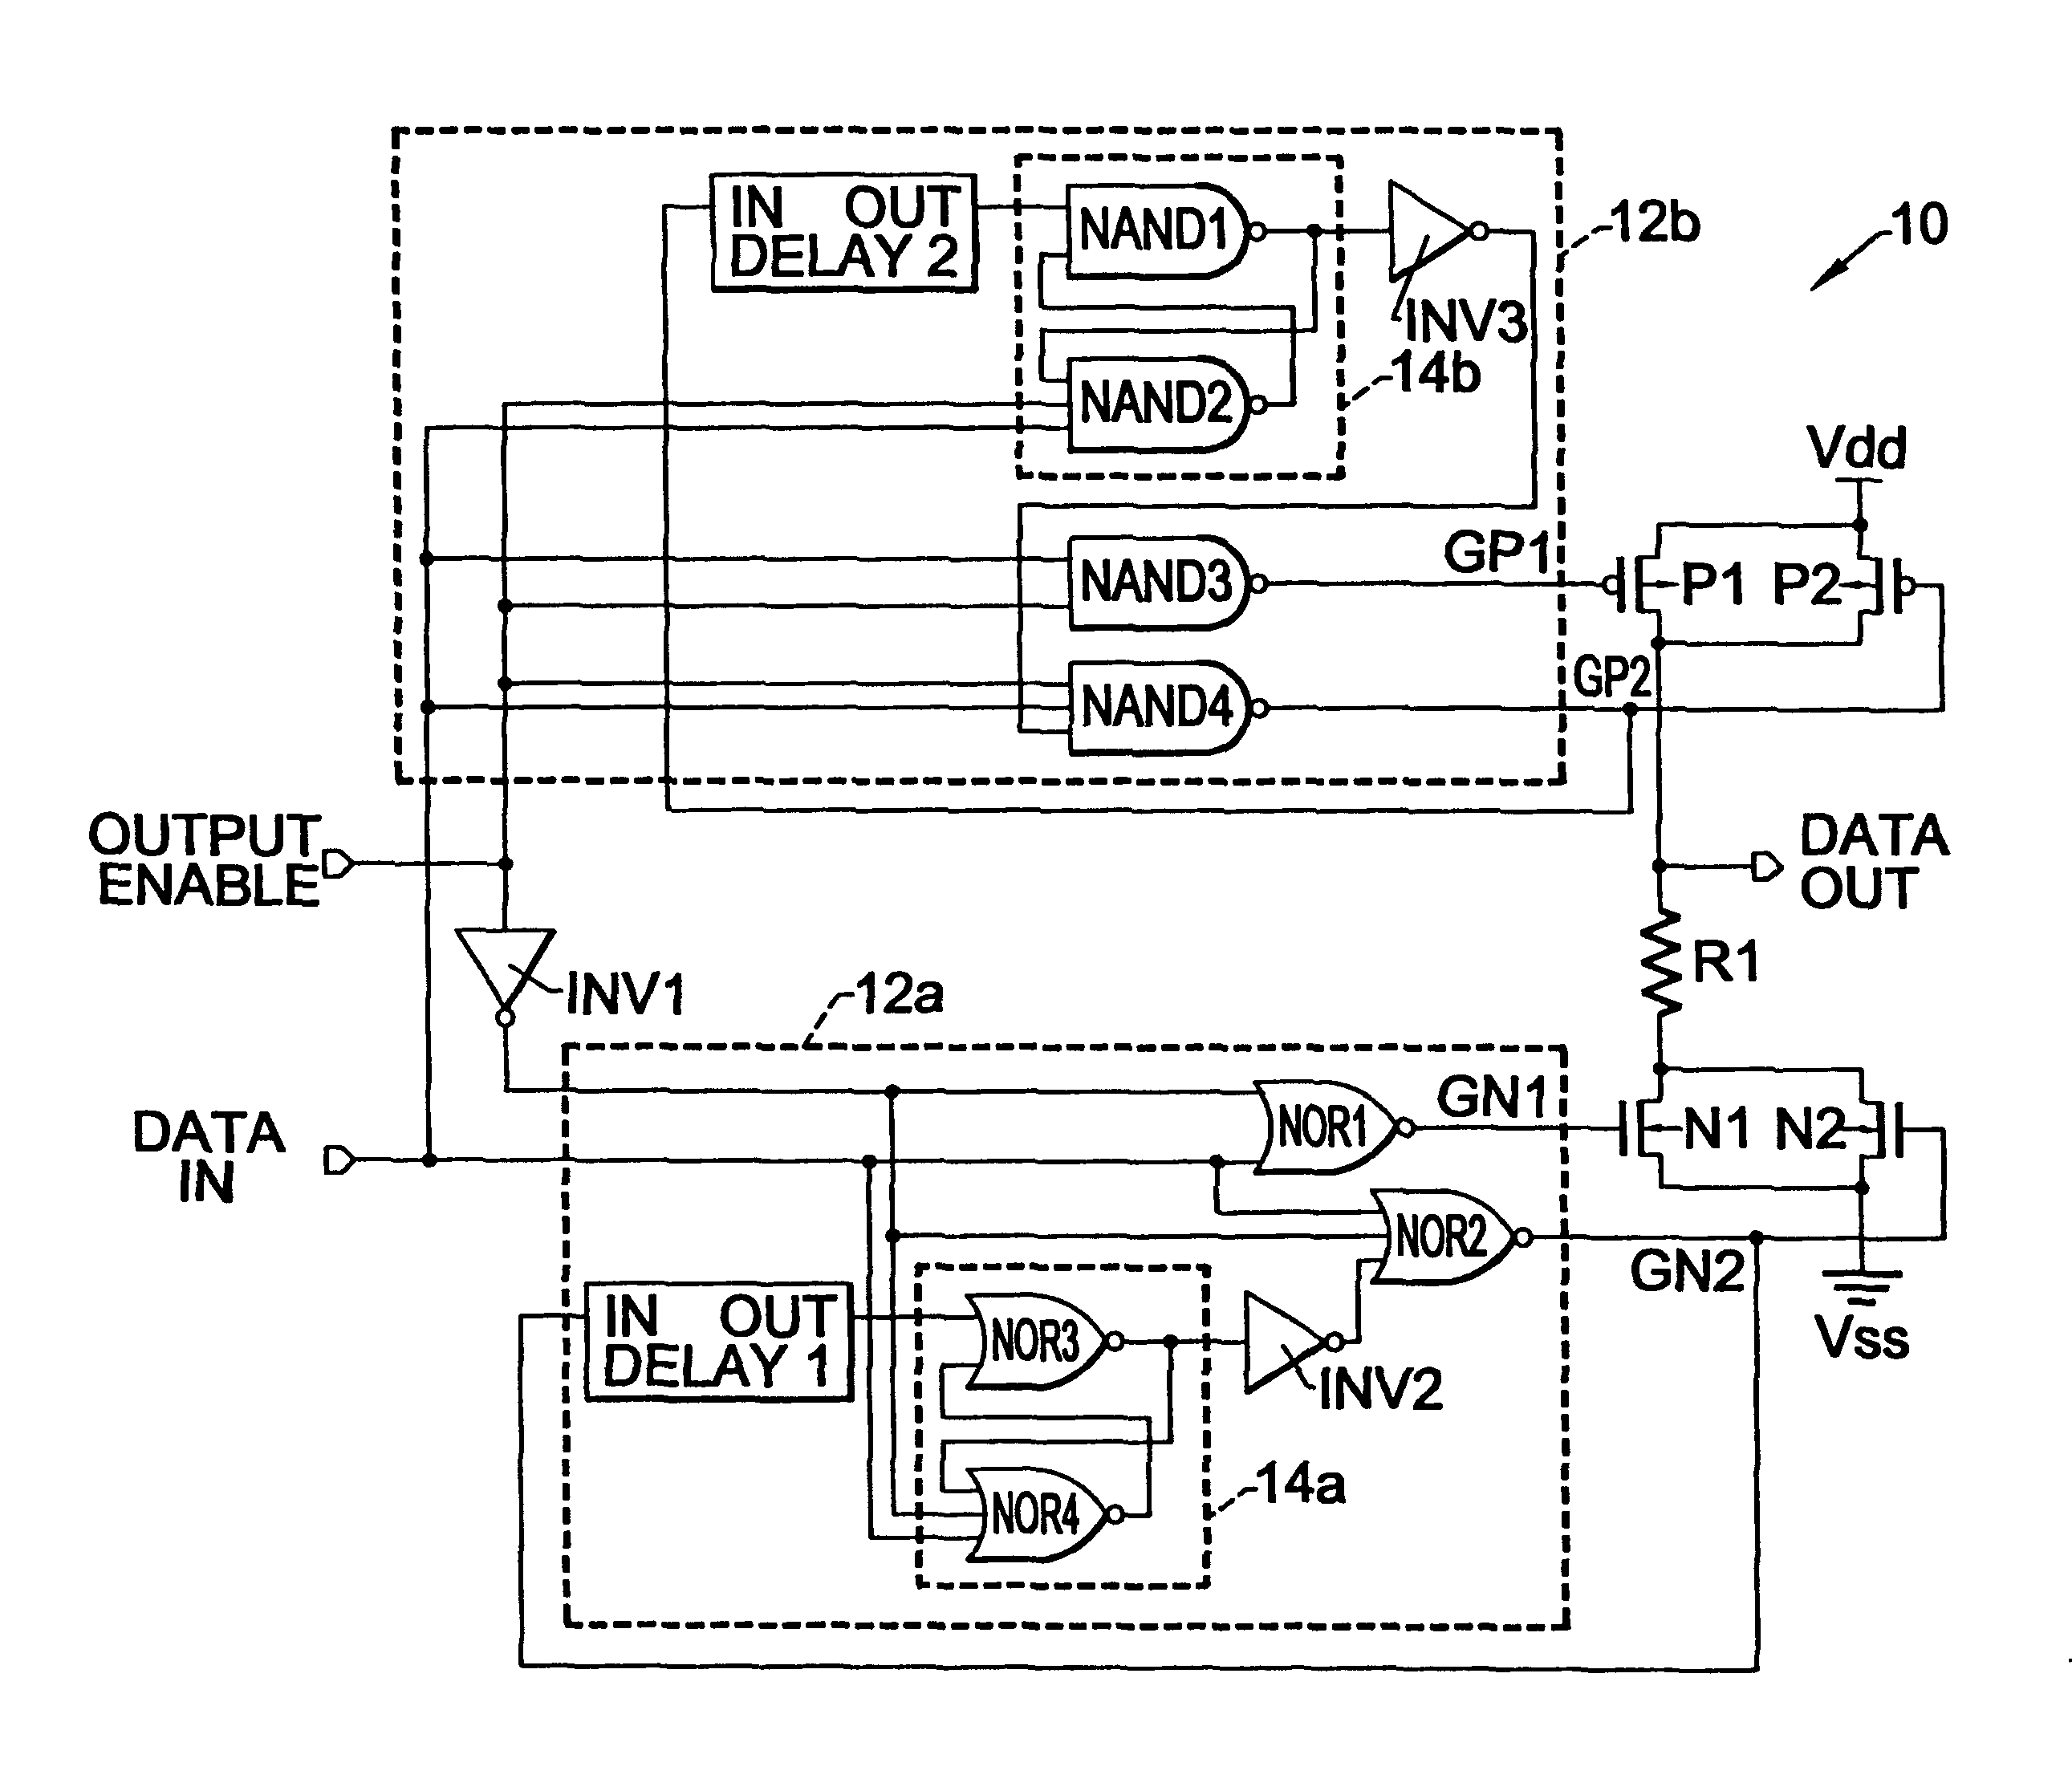 Integrated circuit output buffers having feedback switches therein for reducing simultaneous switching noise and improving impedance matching characteristics